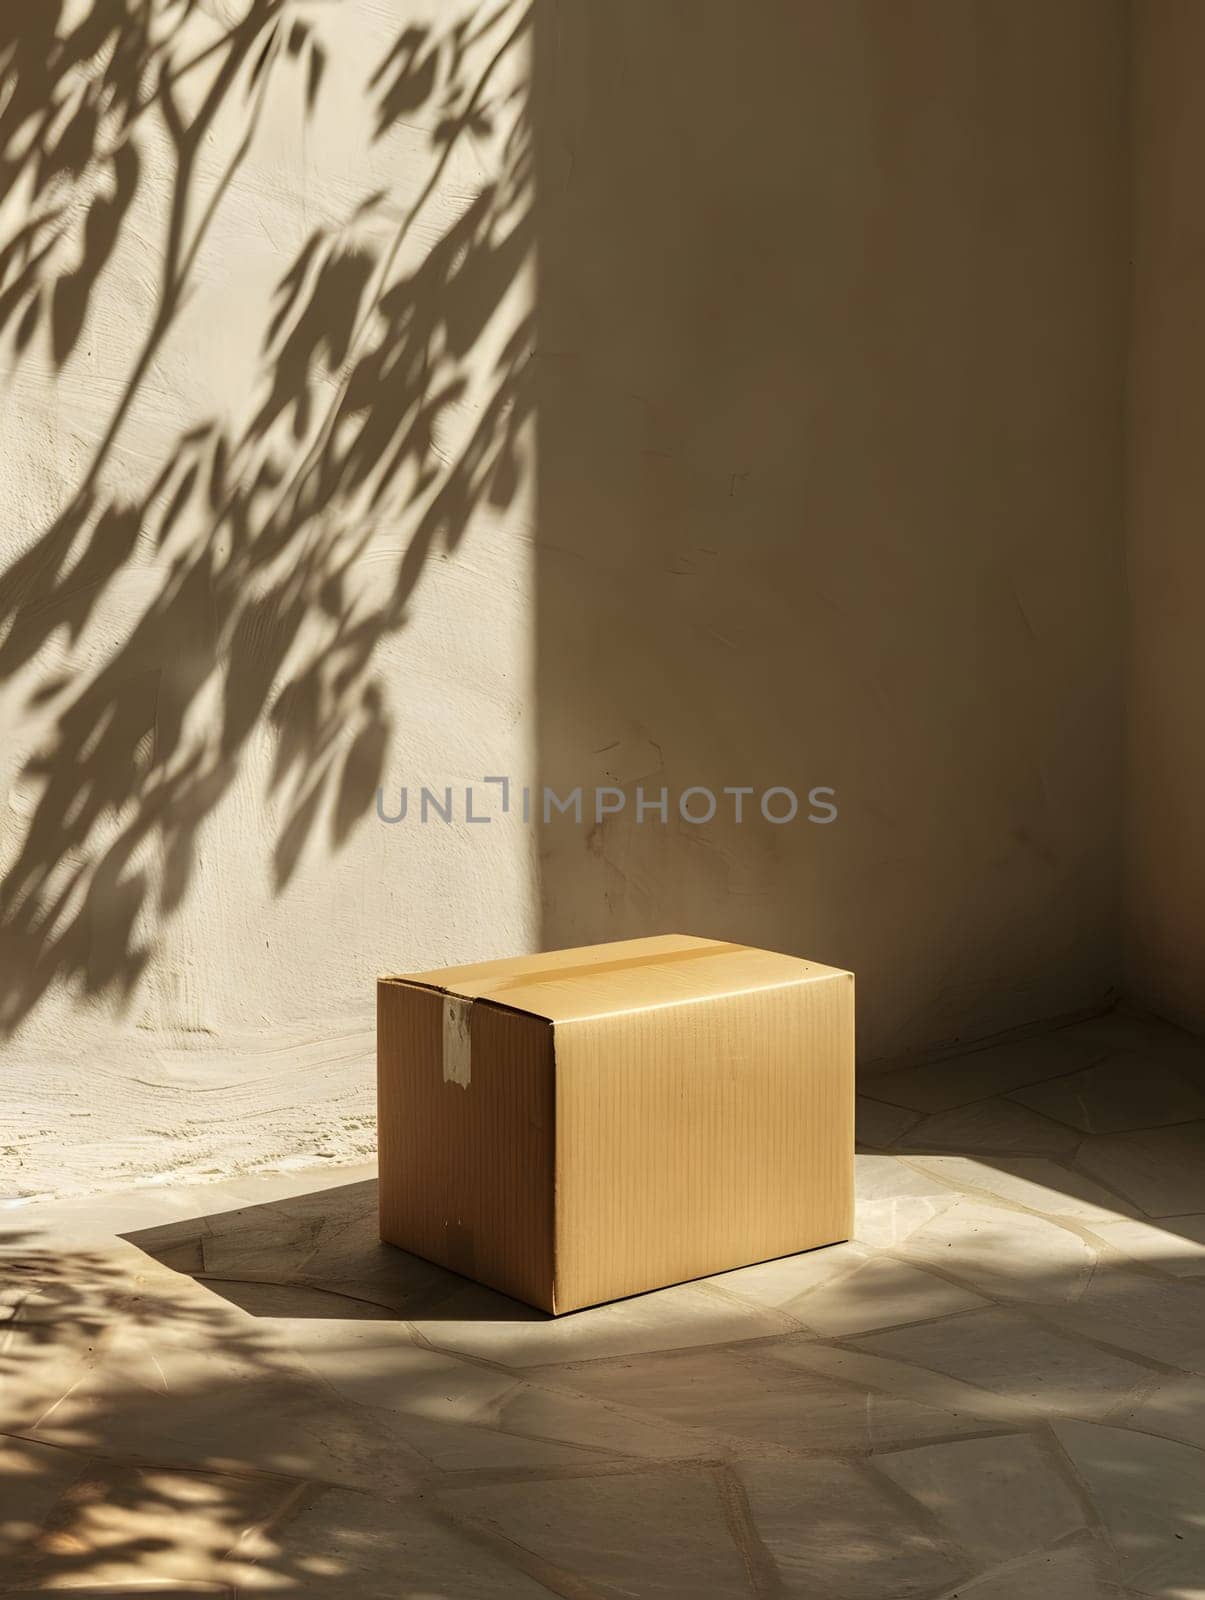 A rectangular cardboard box is resting on the hardwood floor of a room, with a tree shadow casting tints and shades on the wall